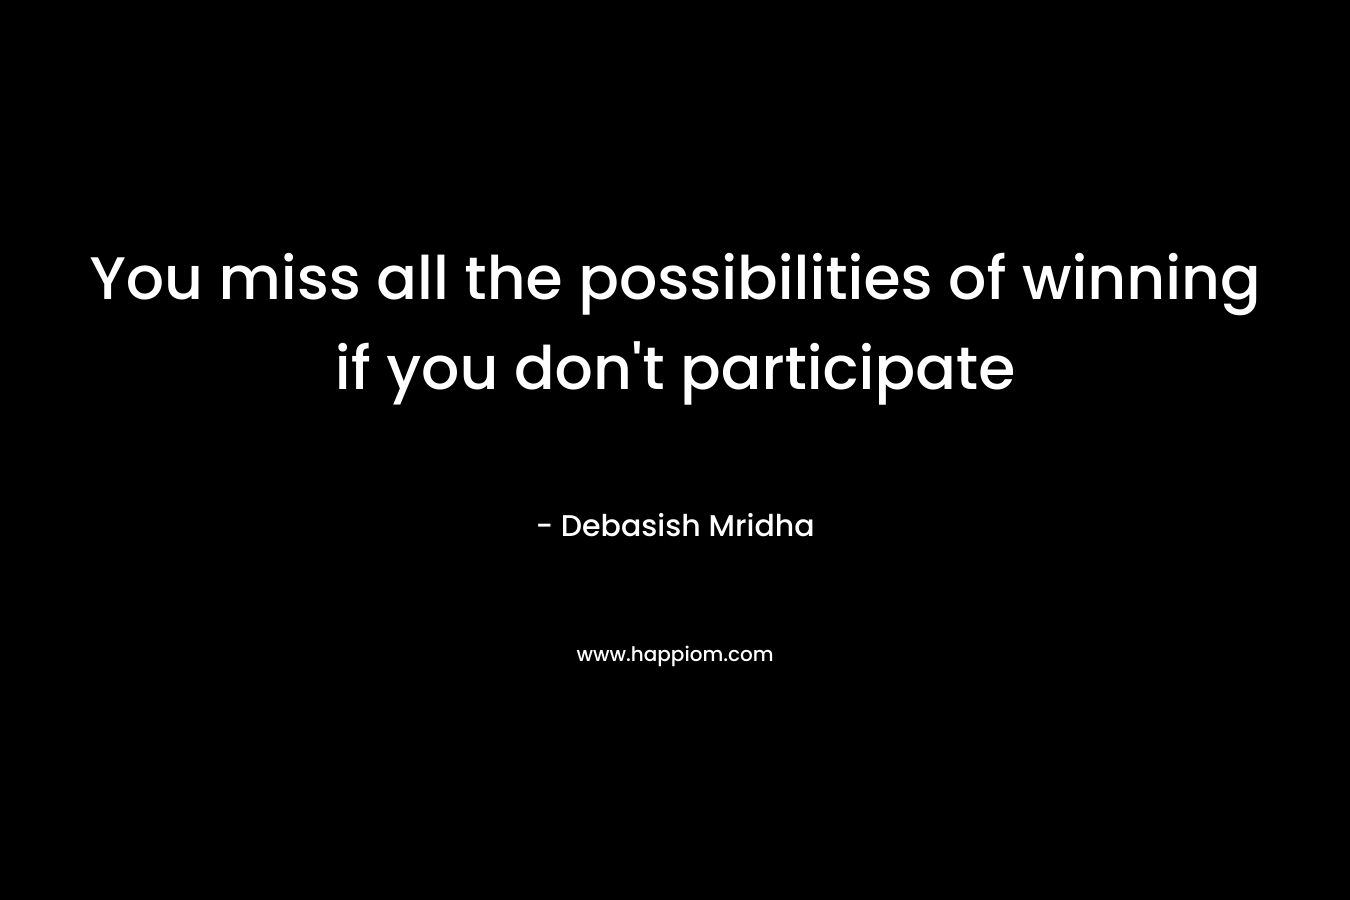 You miss all the possibilities of winning if you don't participate